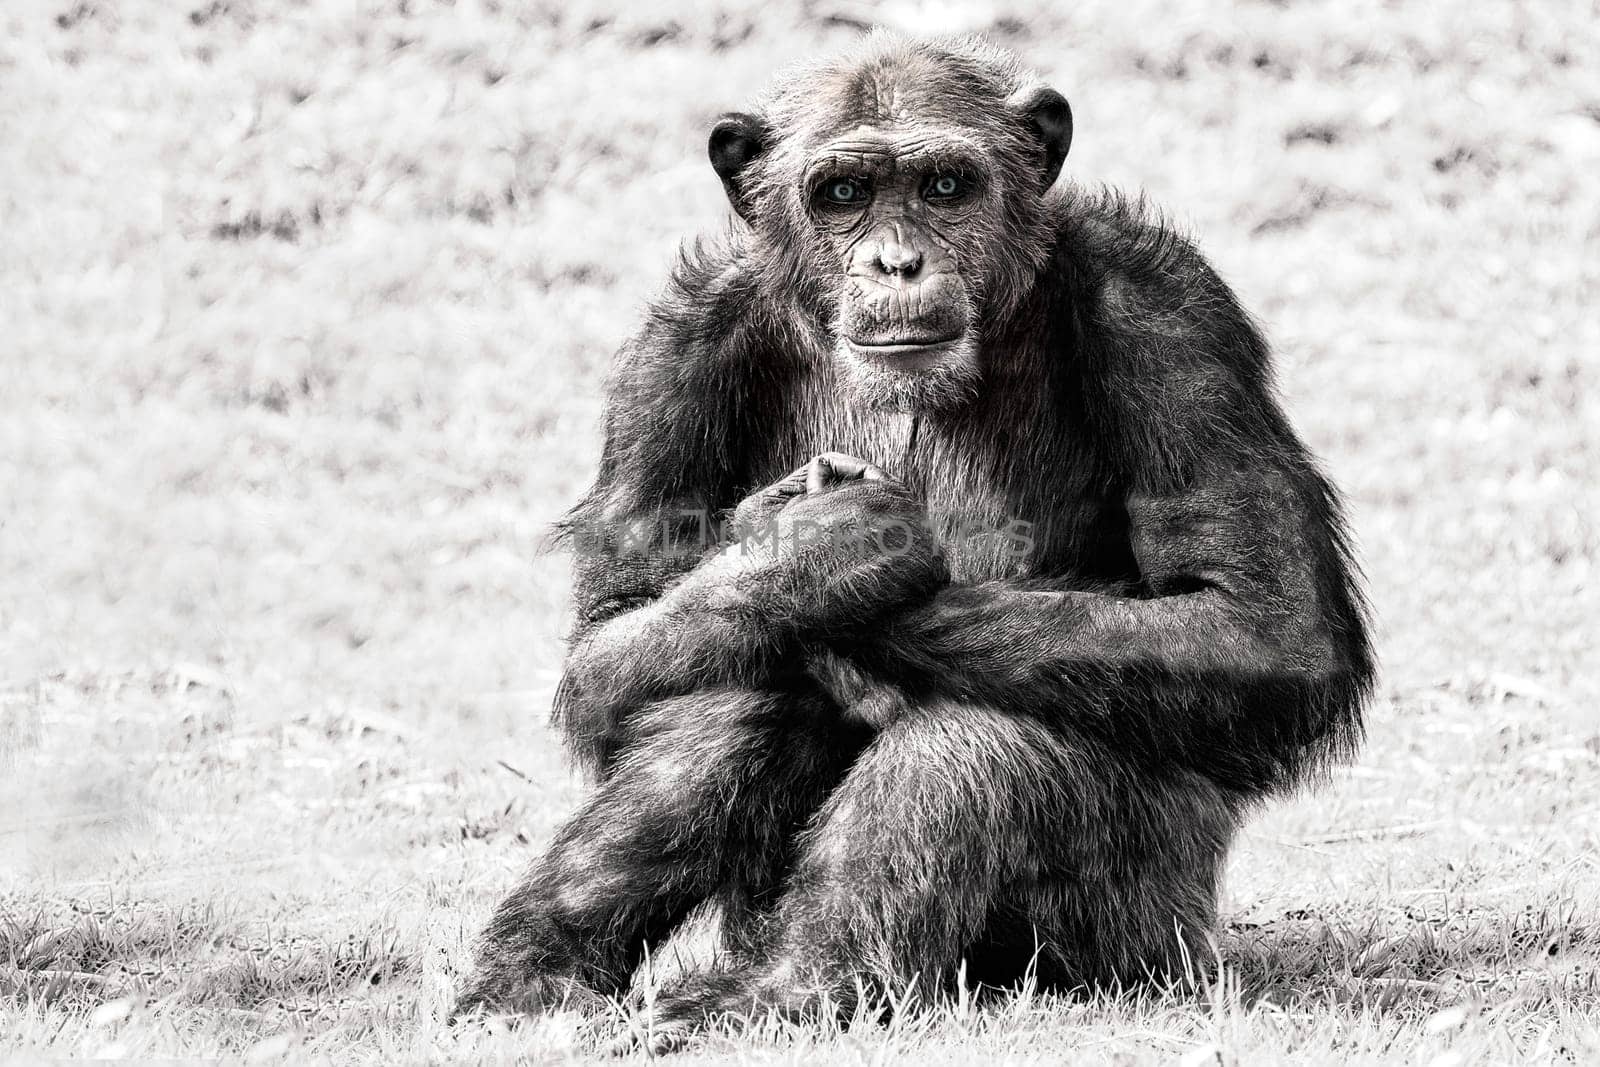 Ape chimpanzee monkey looking at you in black and white